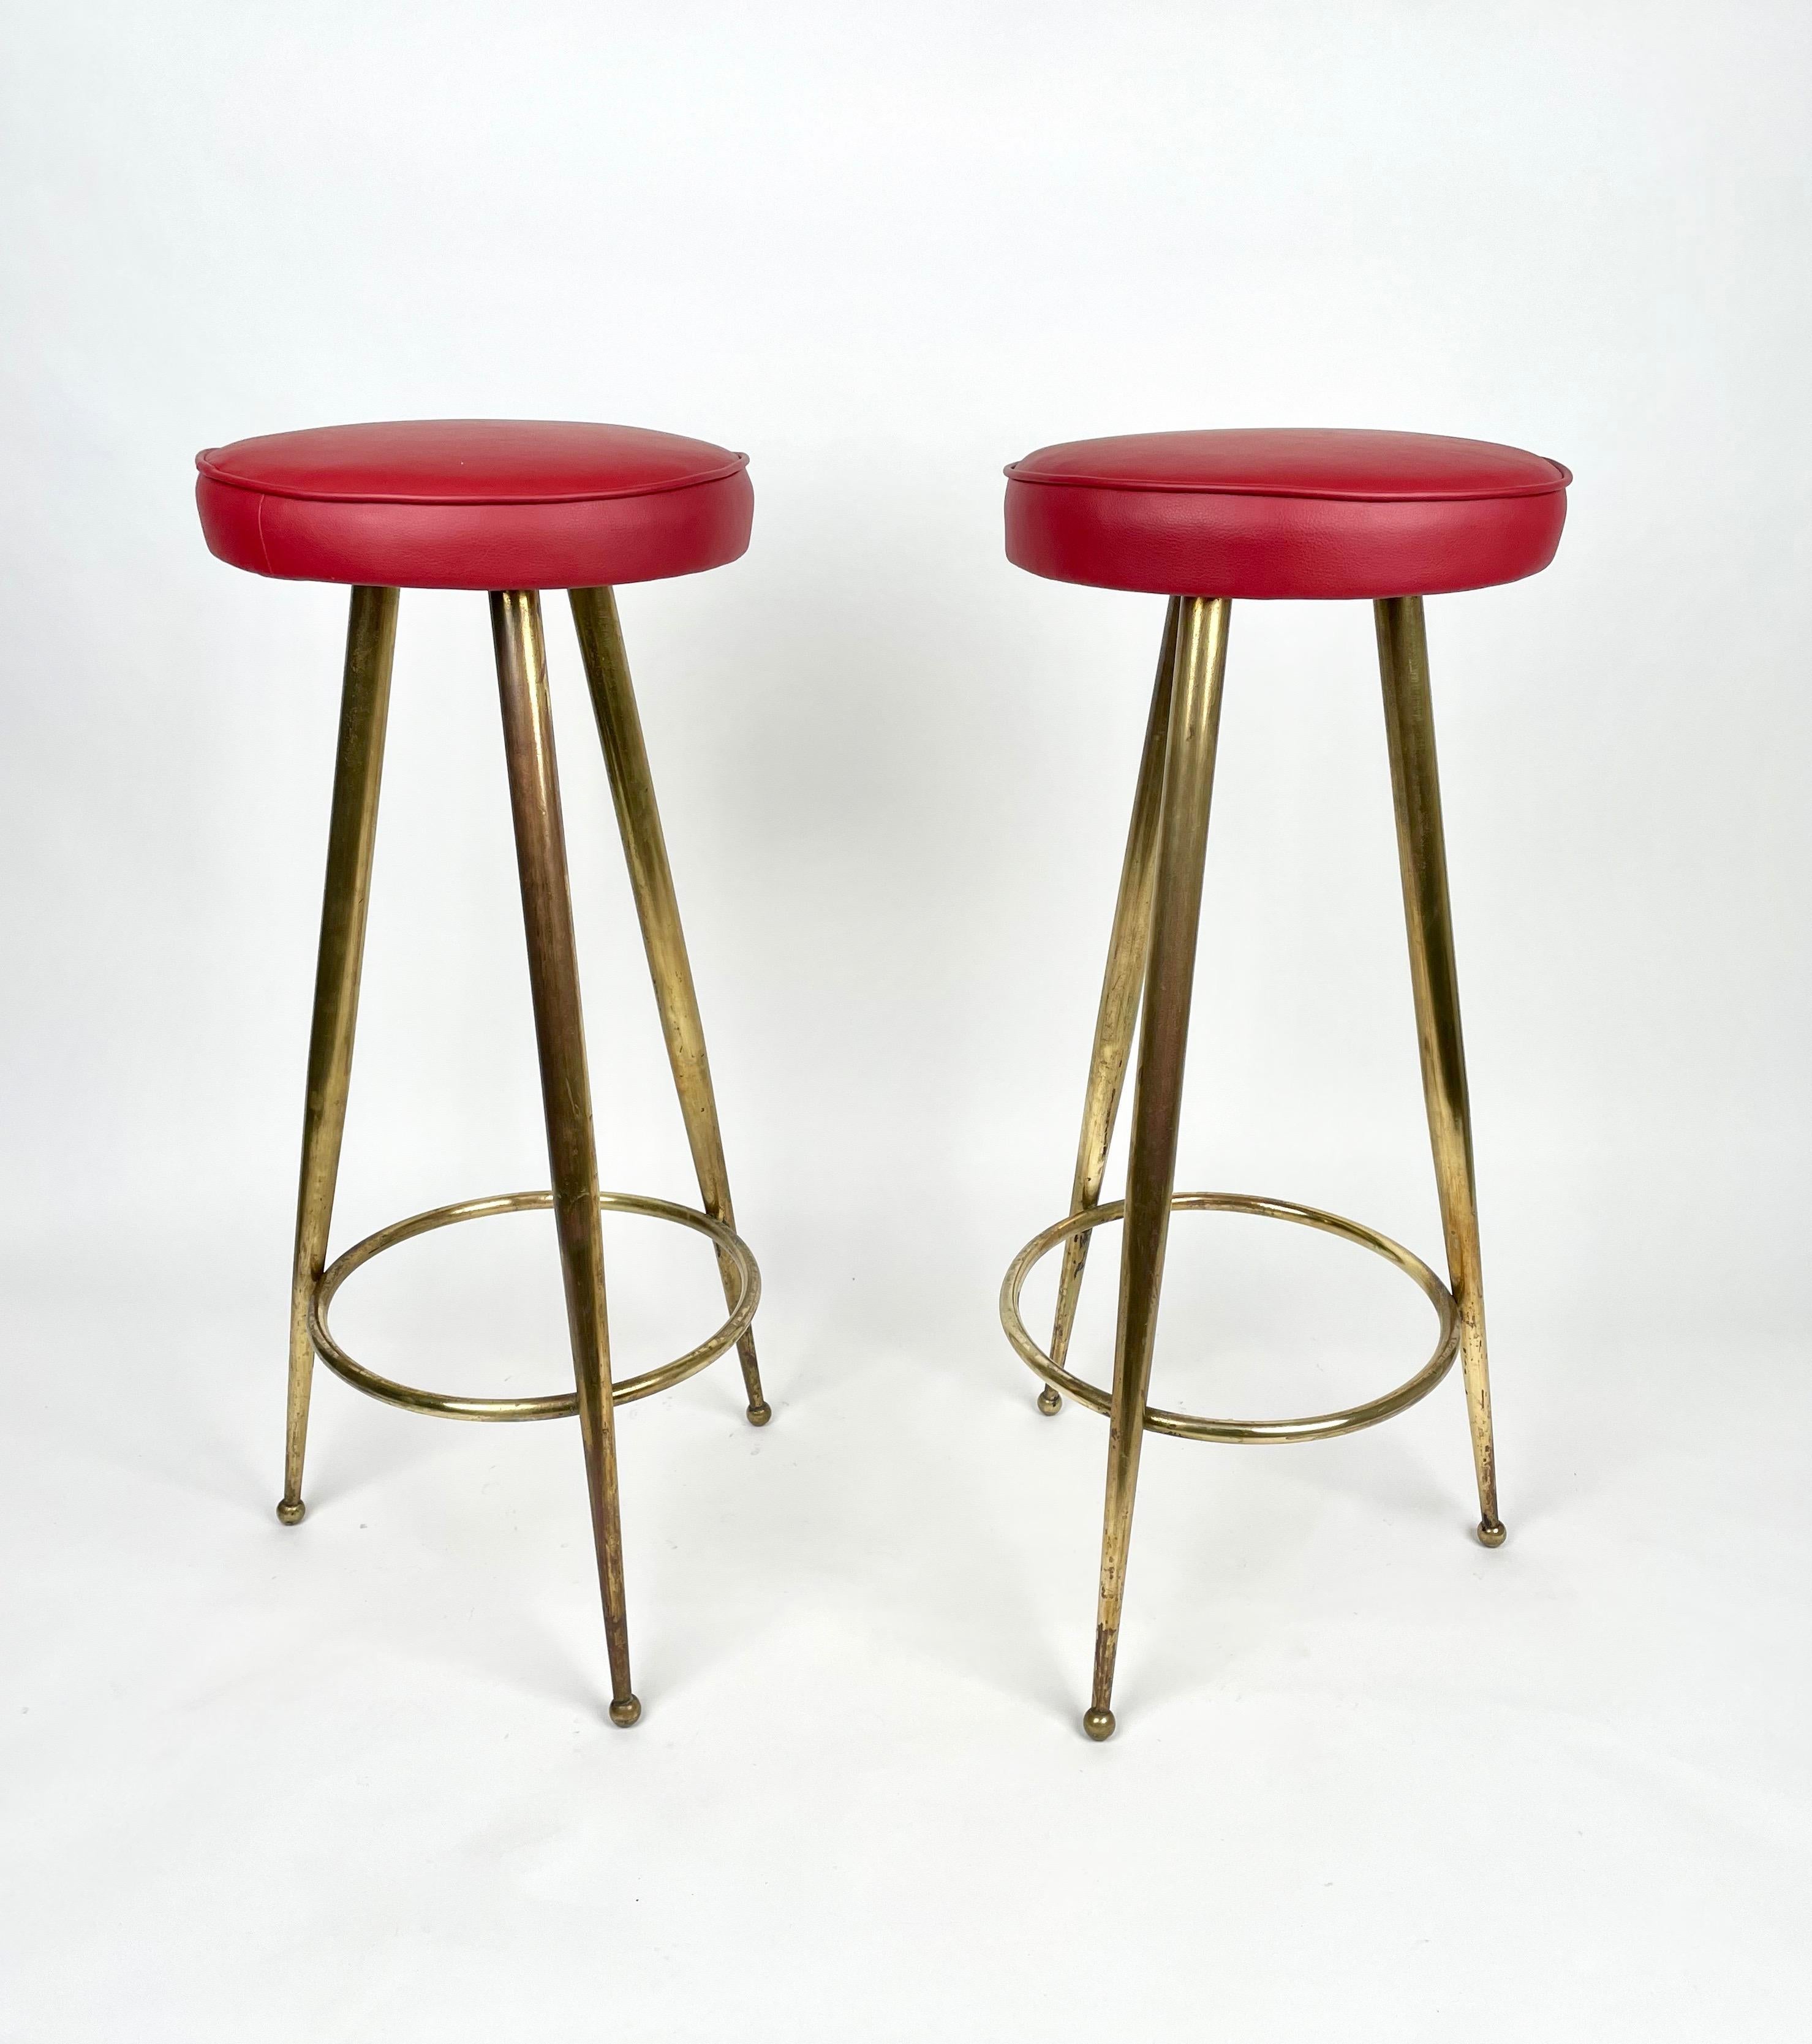 Mid-Century Modern Pair of Tripod Bar Stools Brass and Red Vinyl  Gio Ponti style, Italy 1950s For Sale